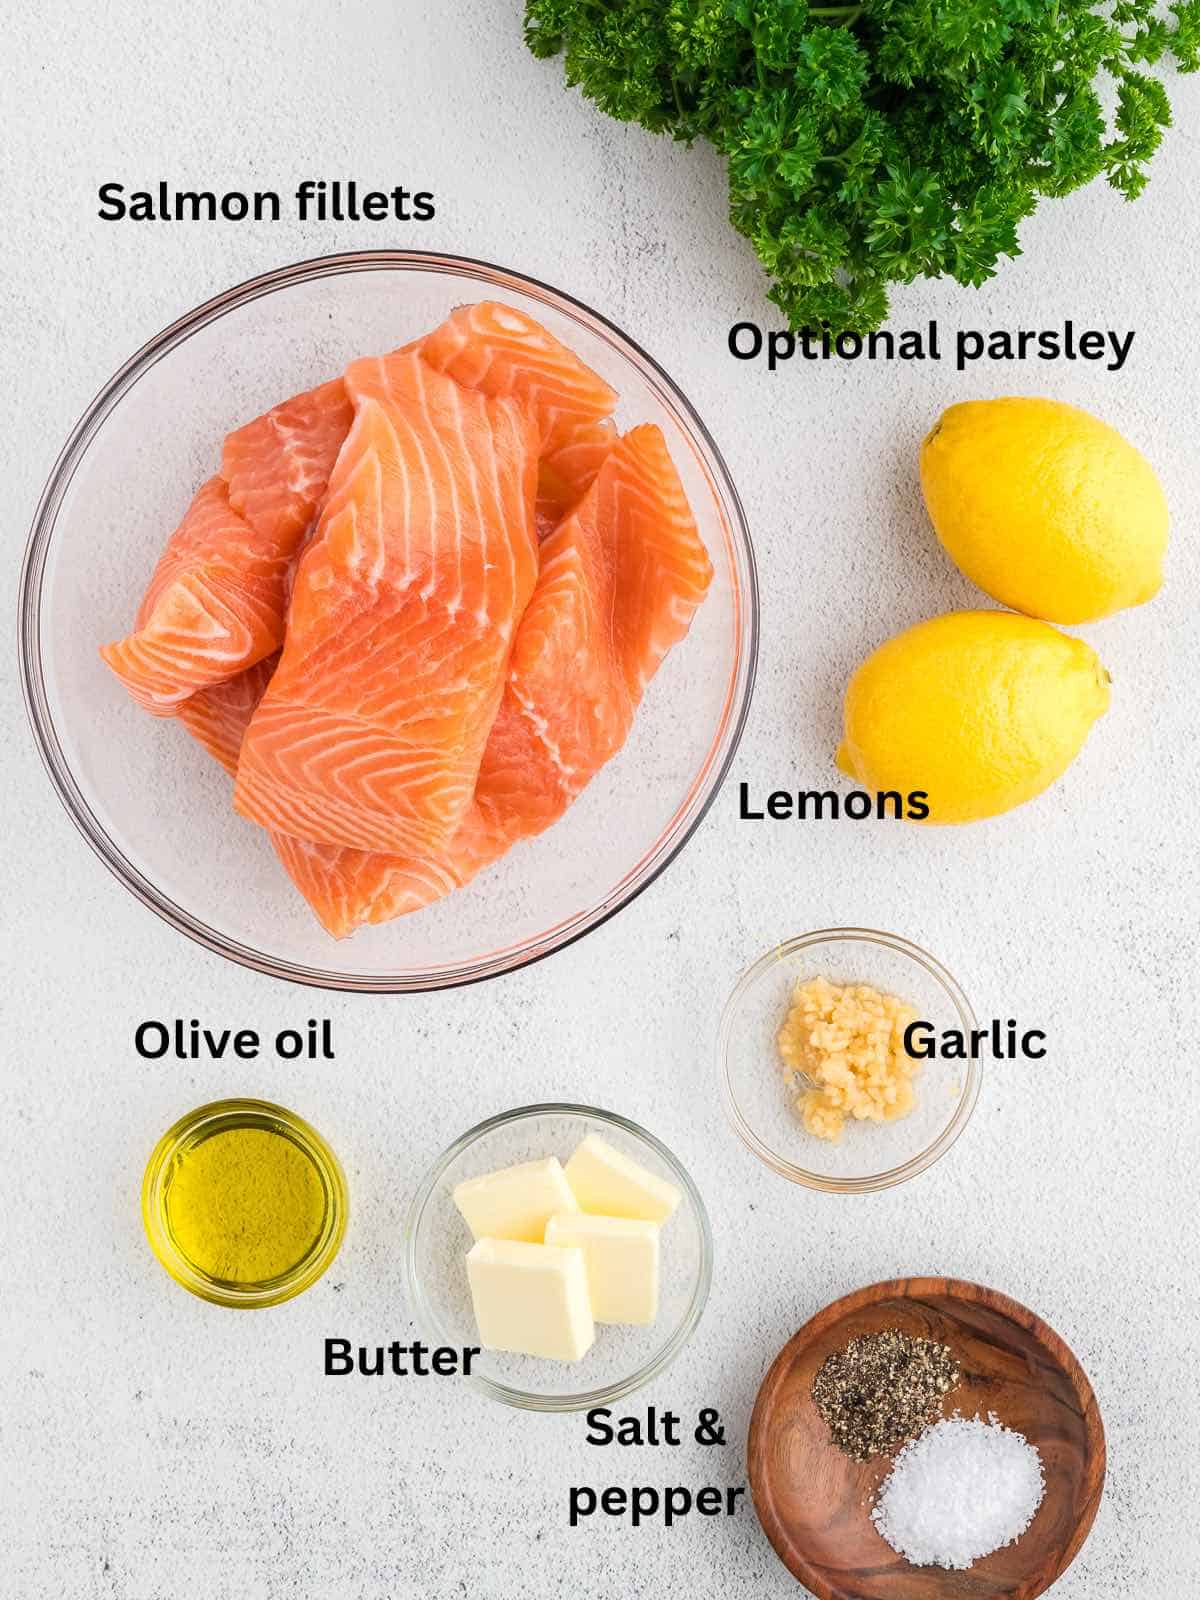 Ingredients on a counter including salmon fillets, lemons, parsley and pats of butter. 